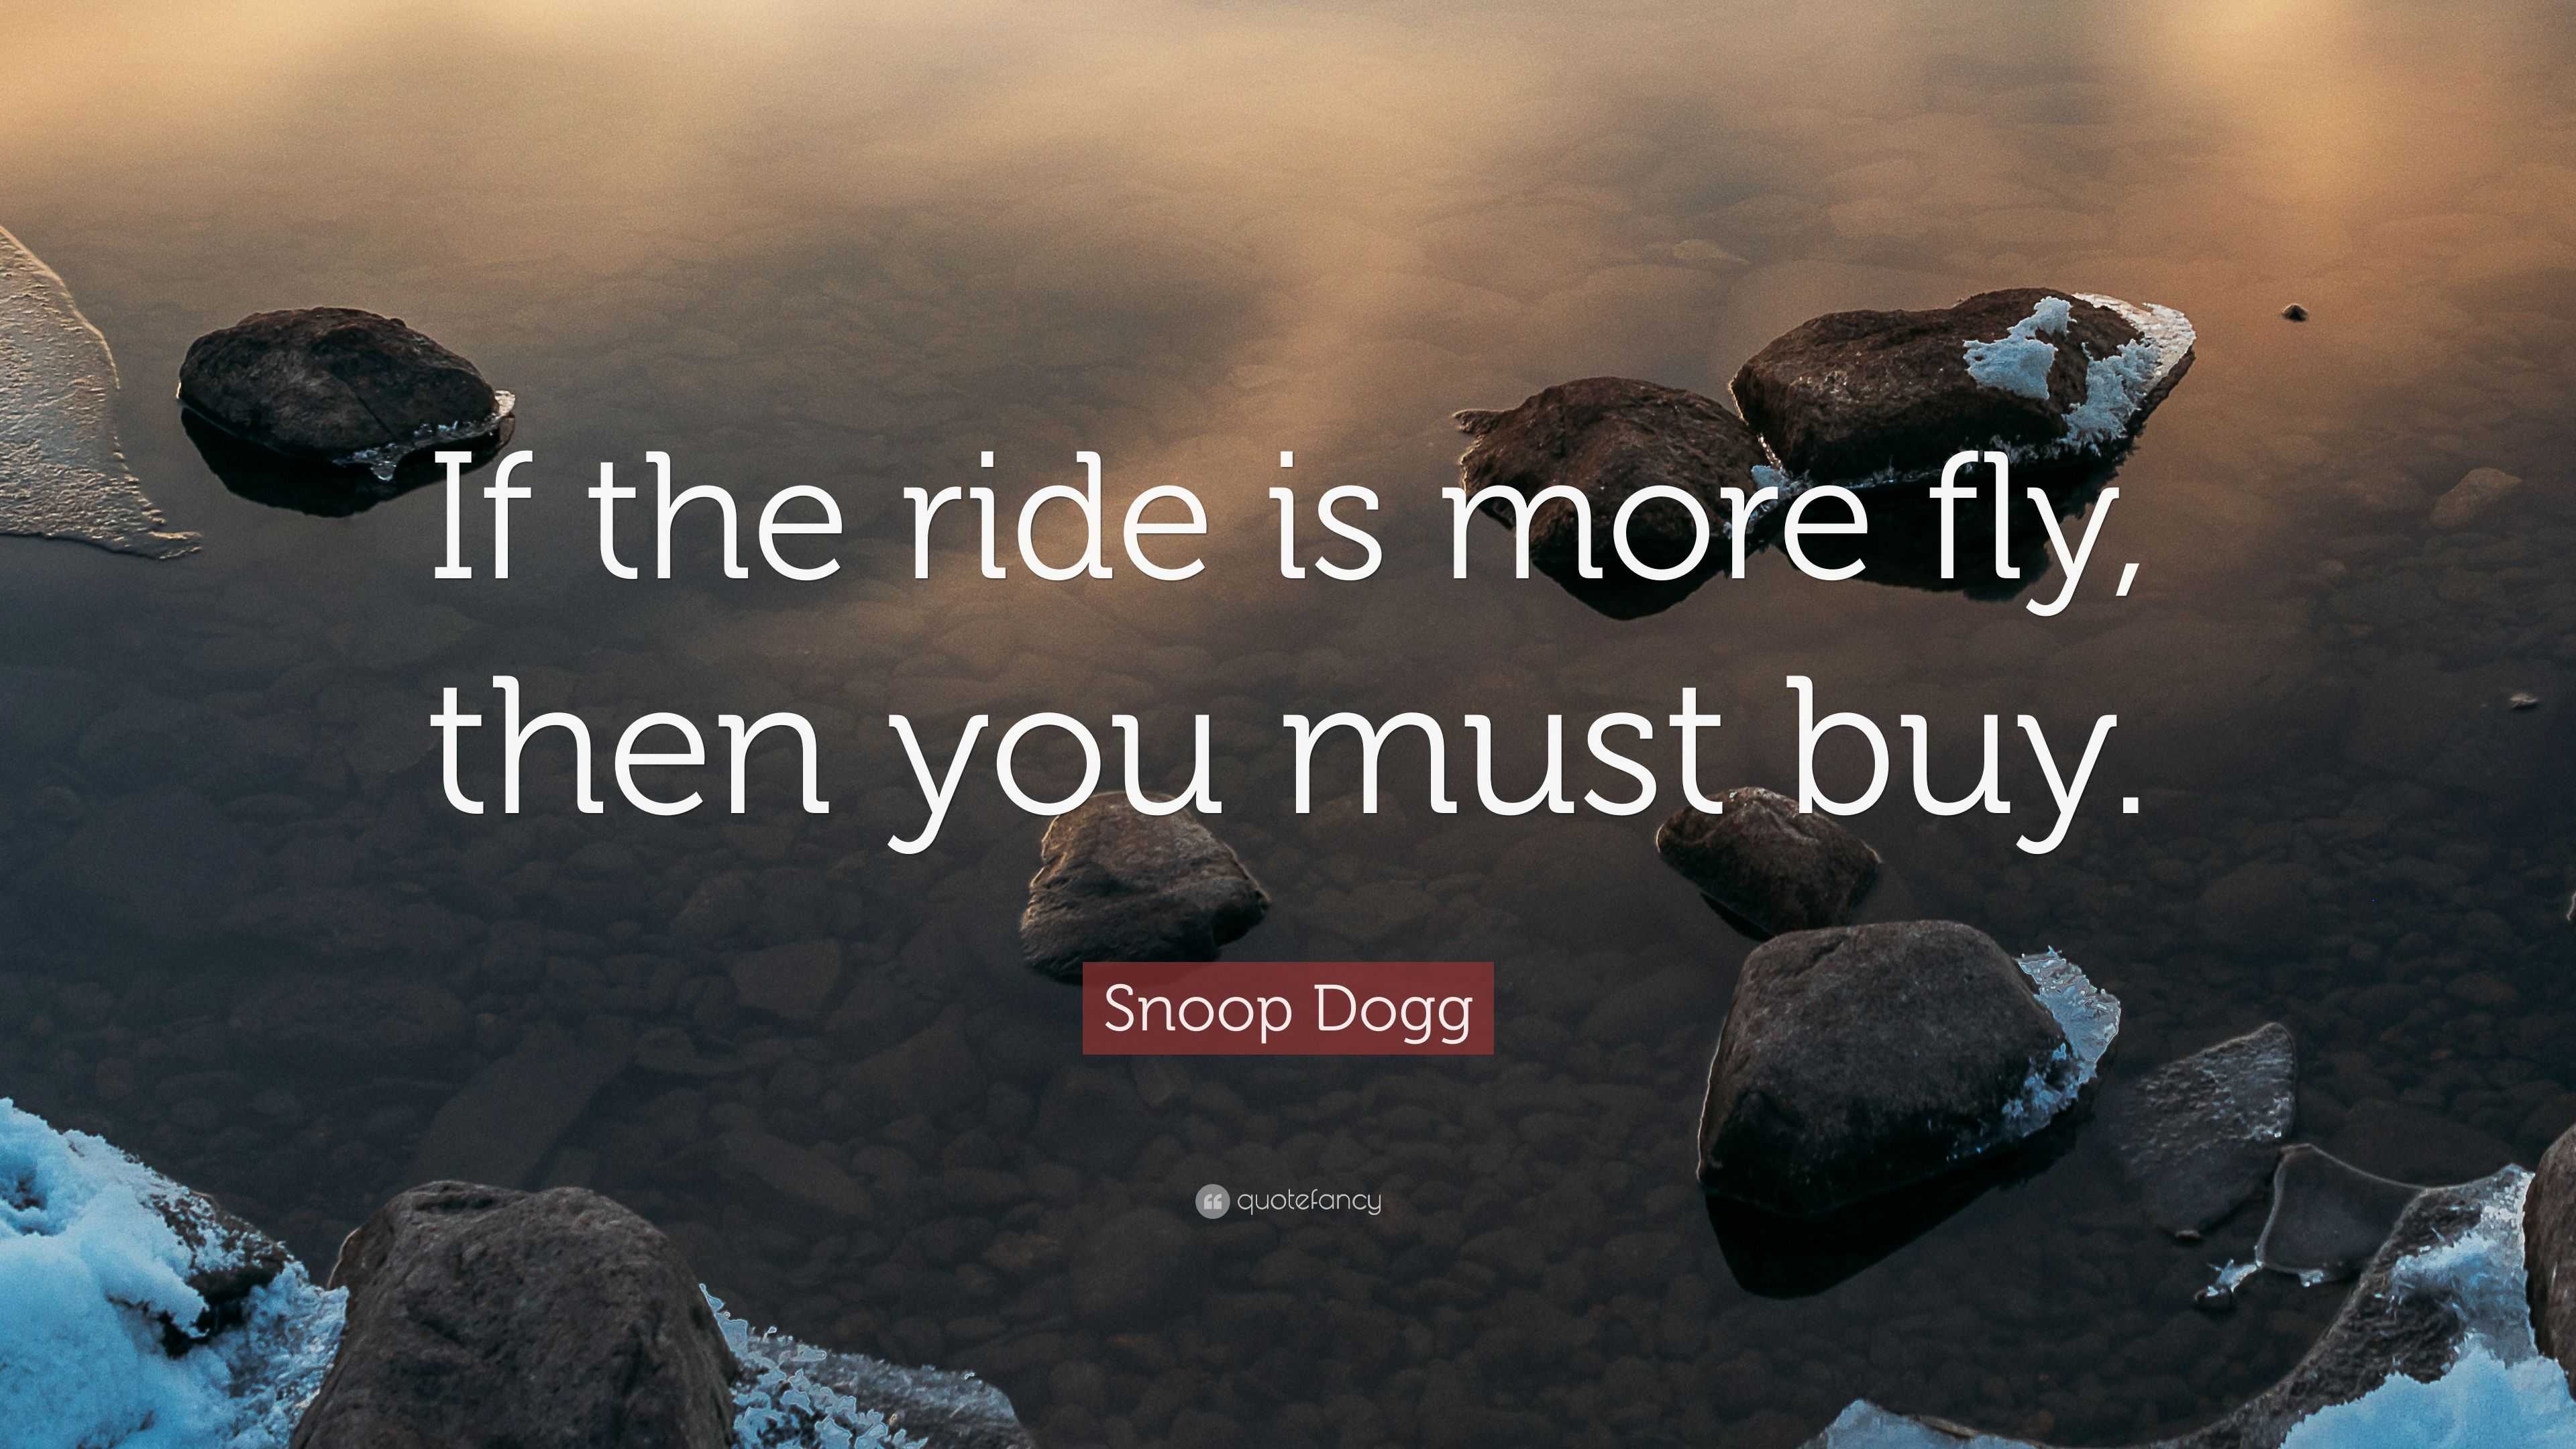 60 Snoop Dogg Quotes To Remind You How to Stay Fly (2021)